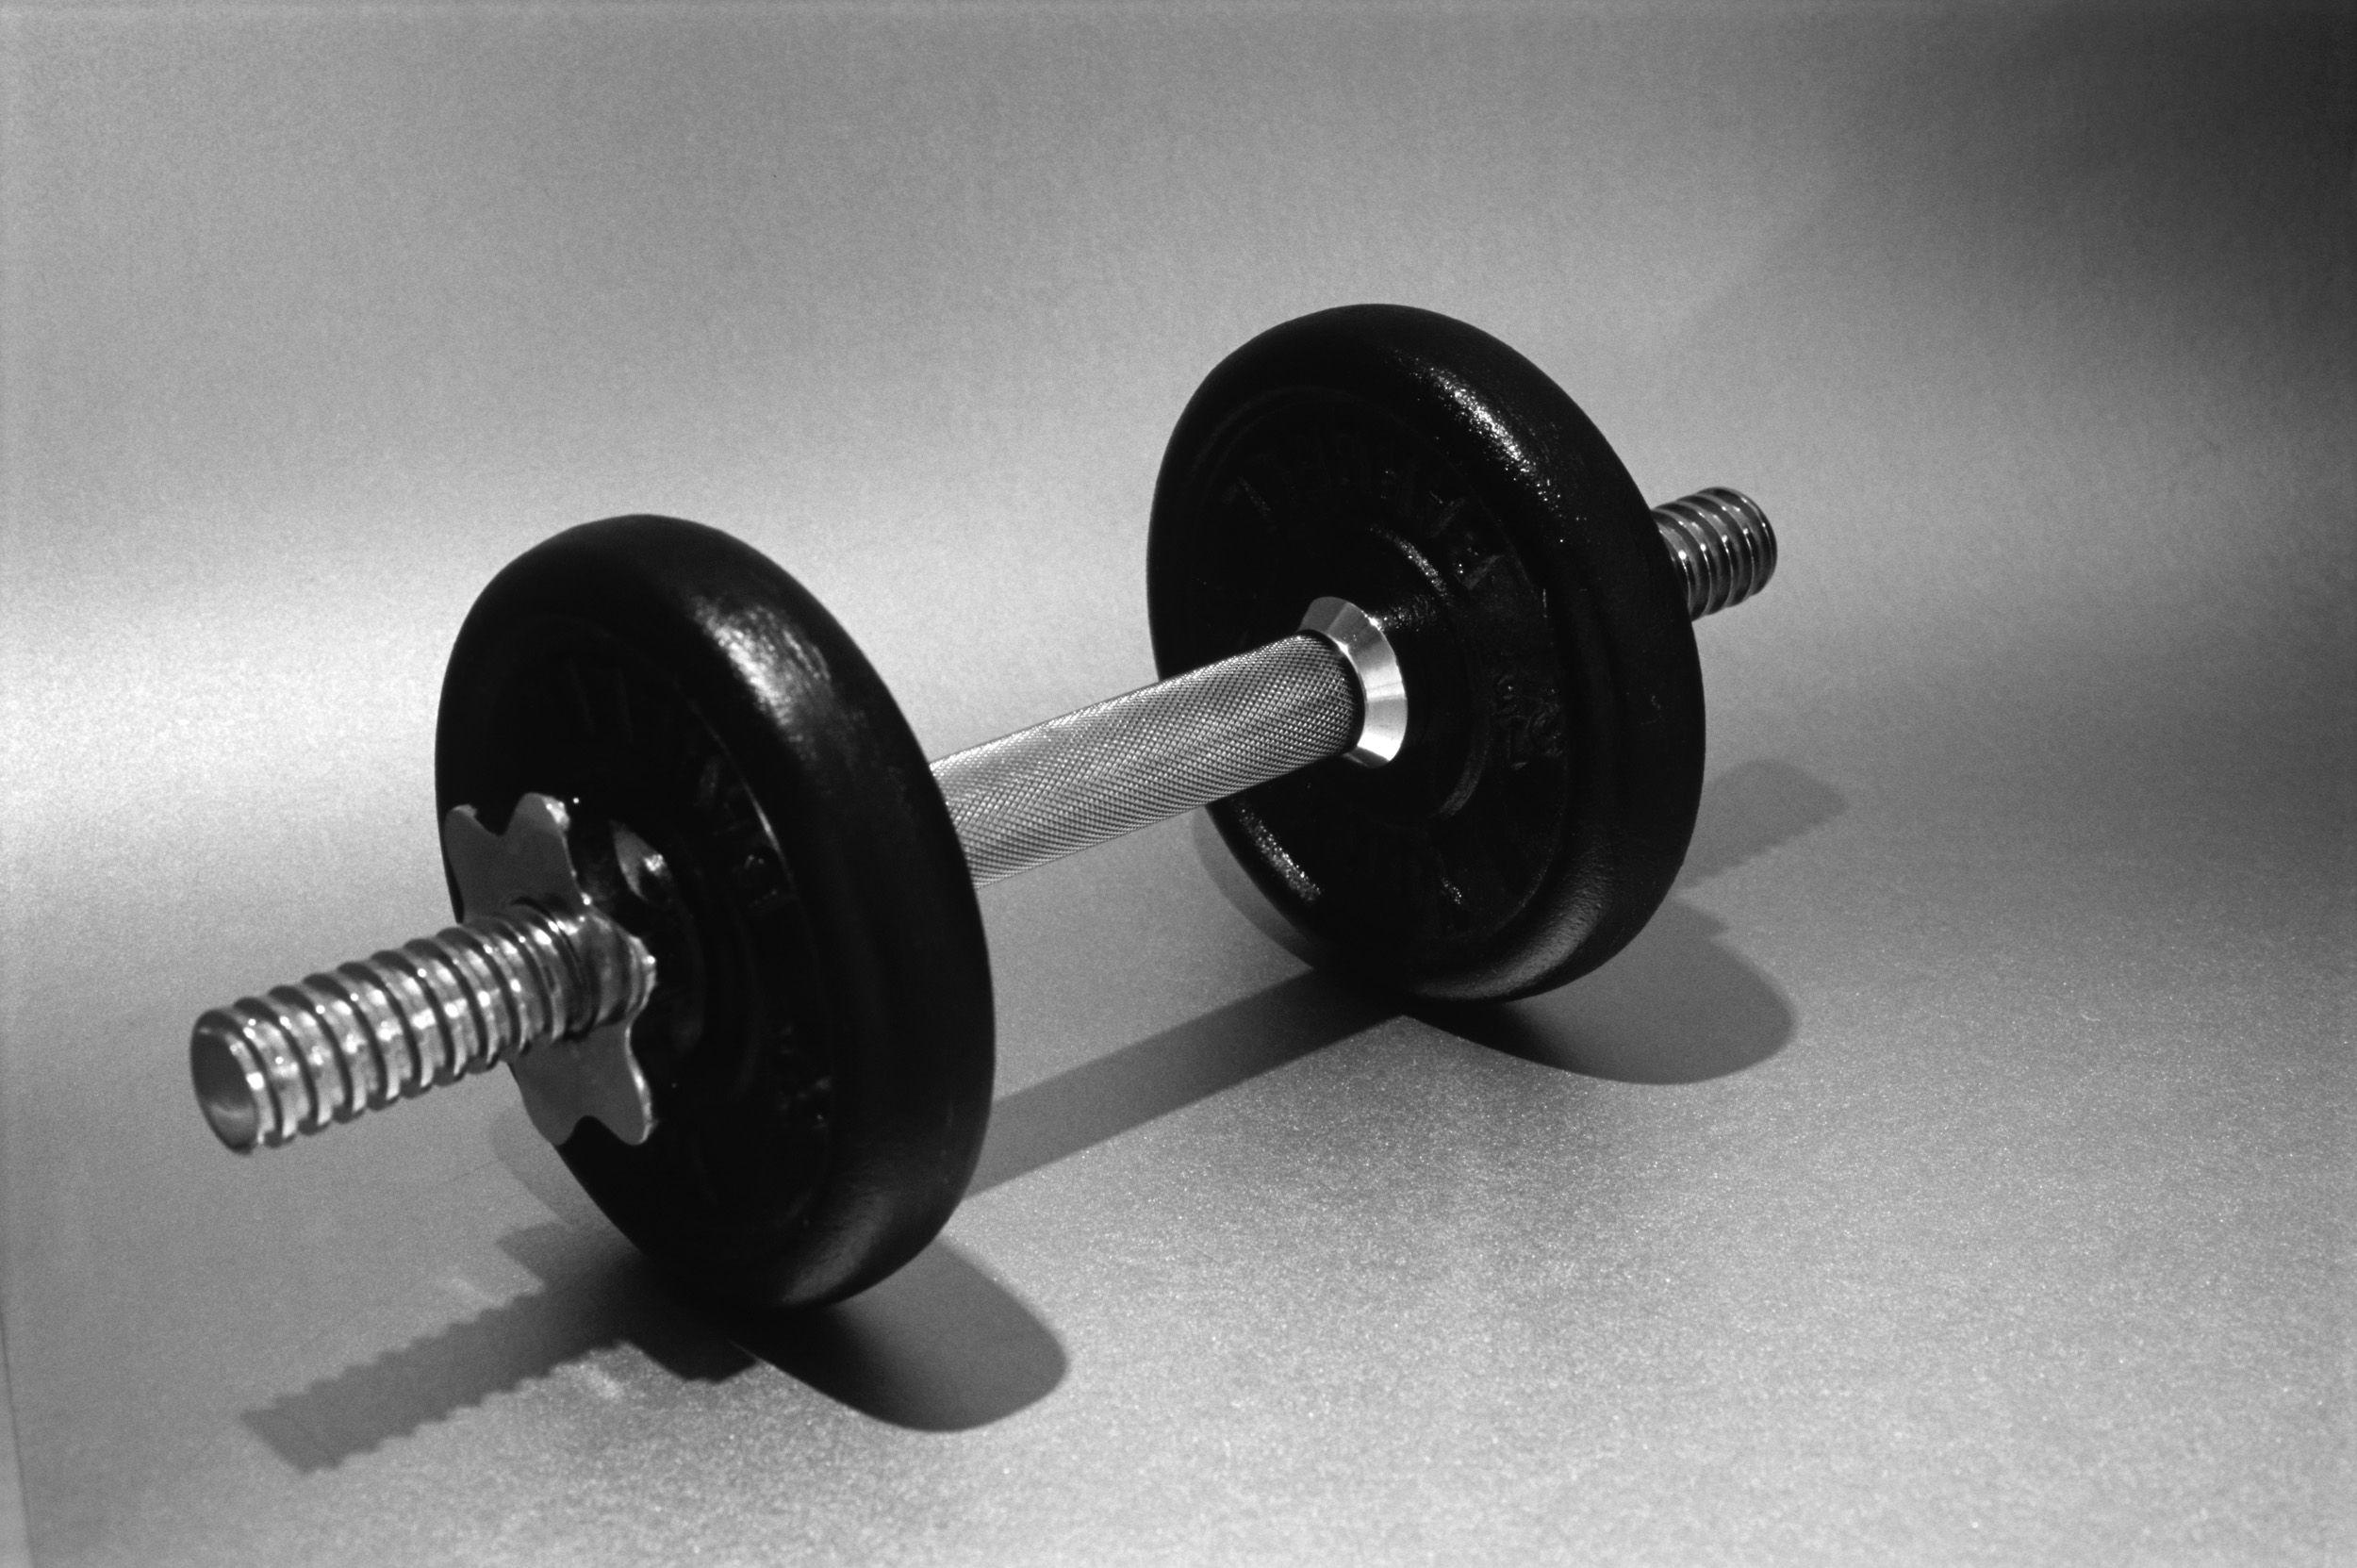 Free image of dumbbell